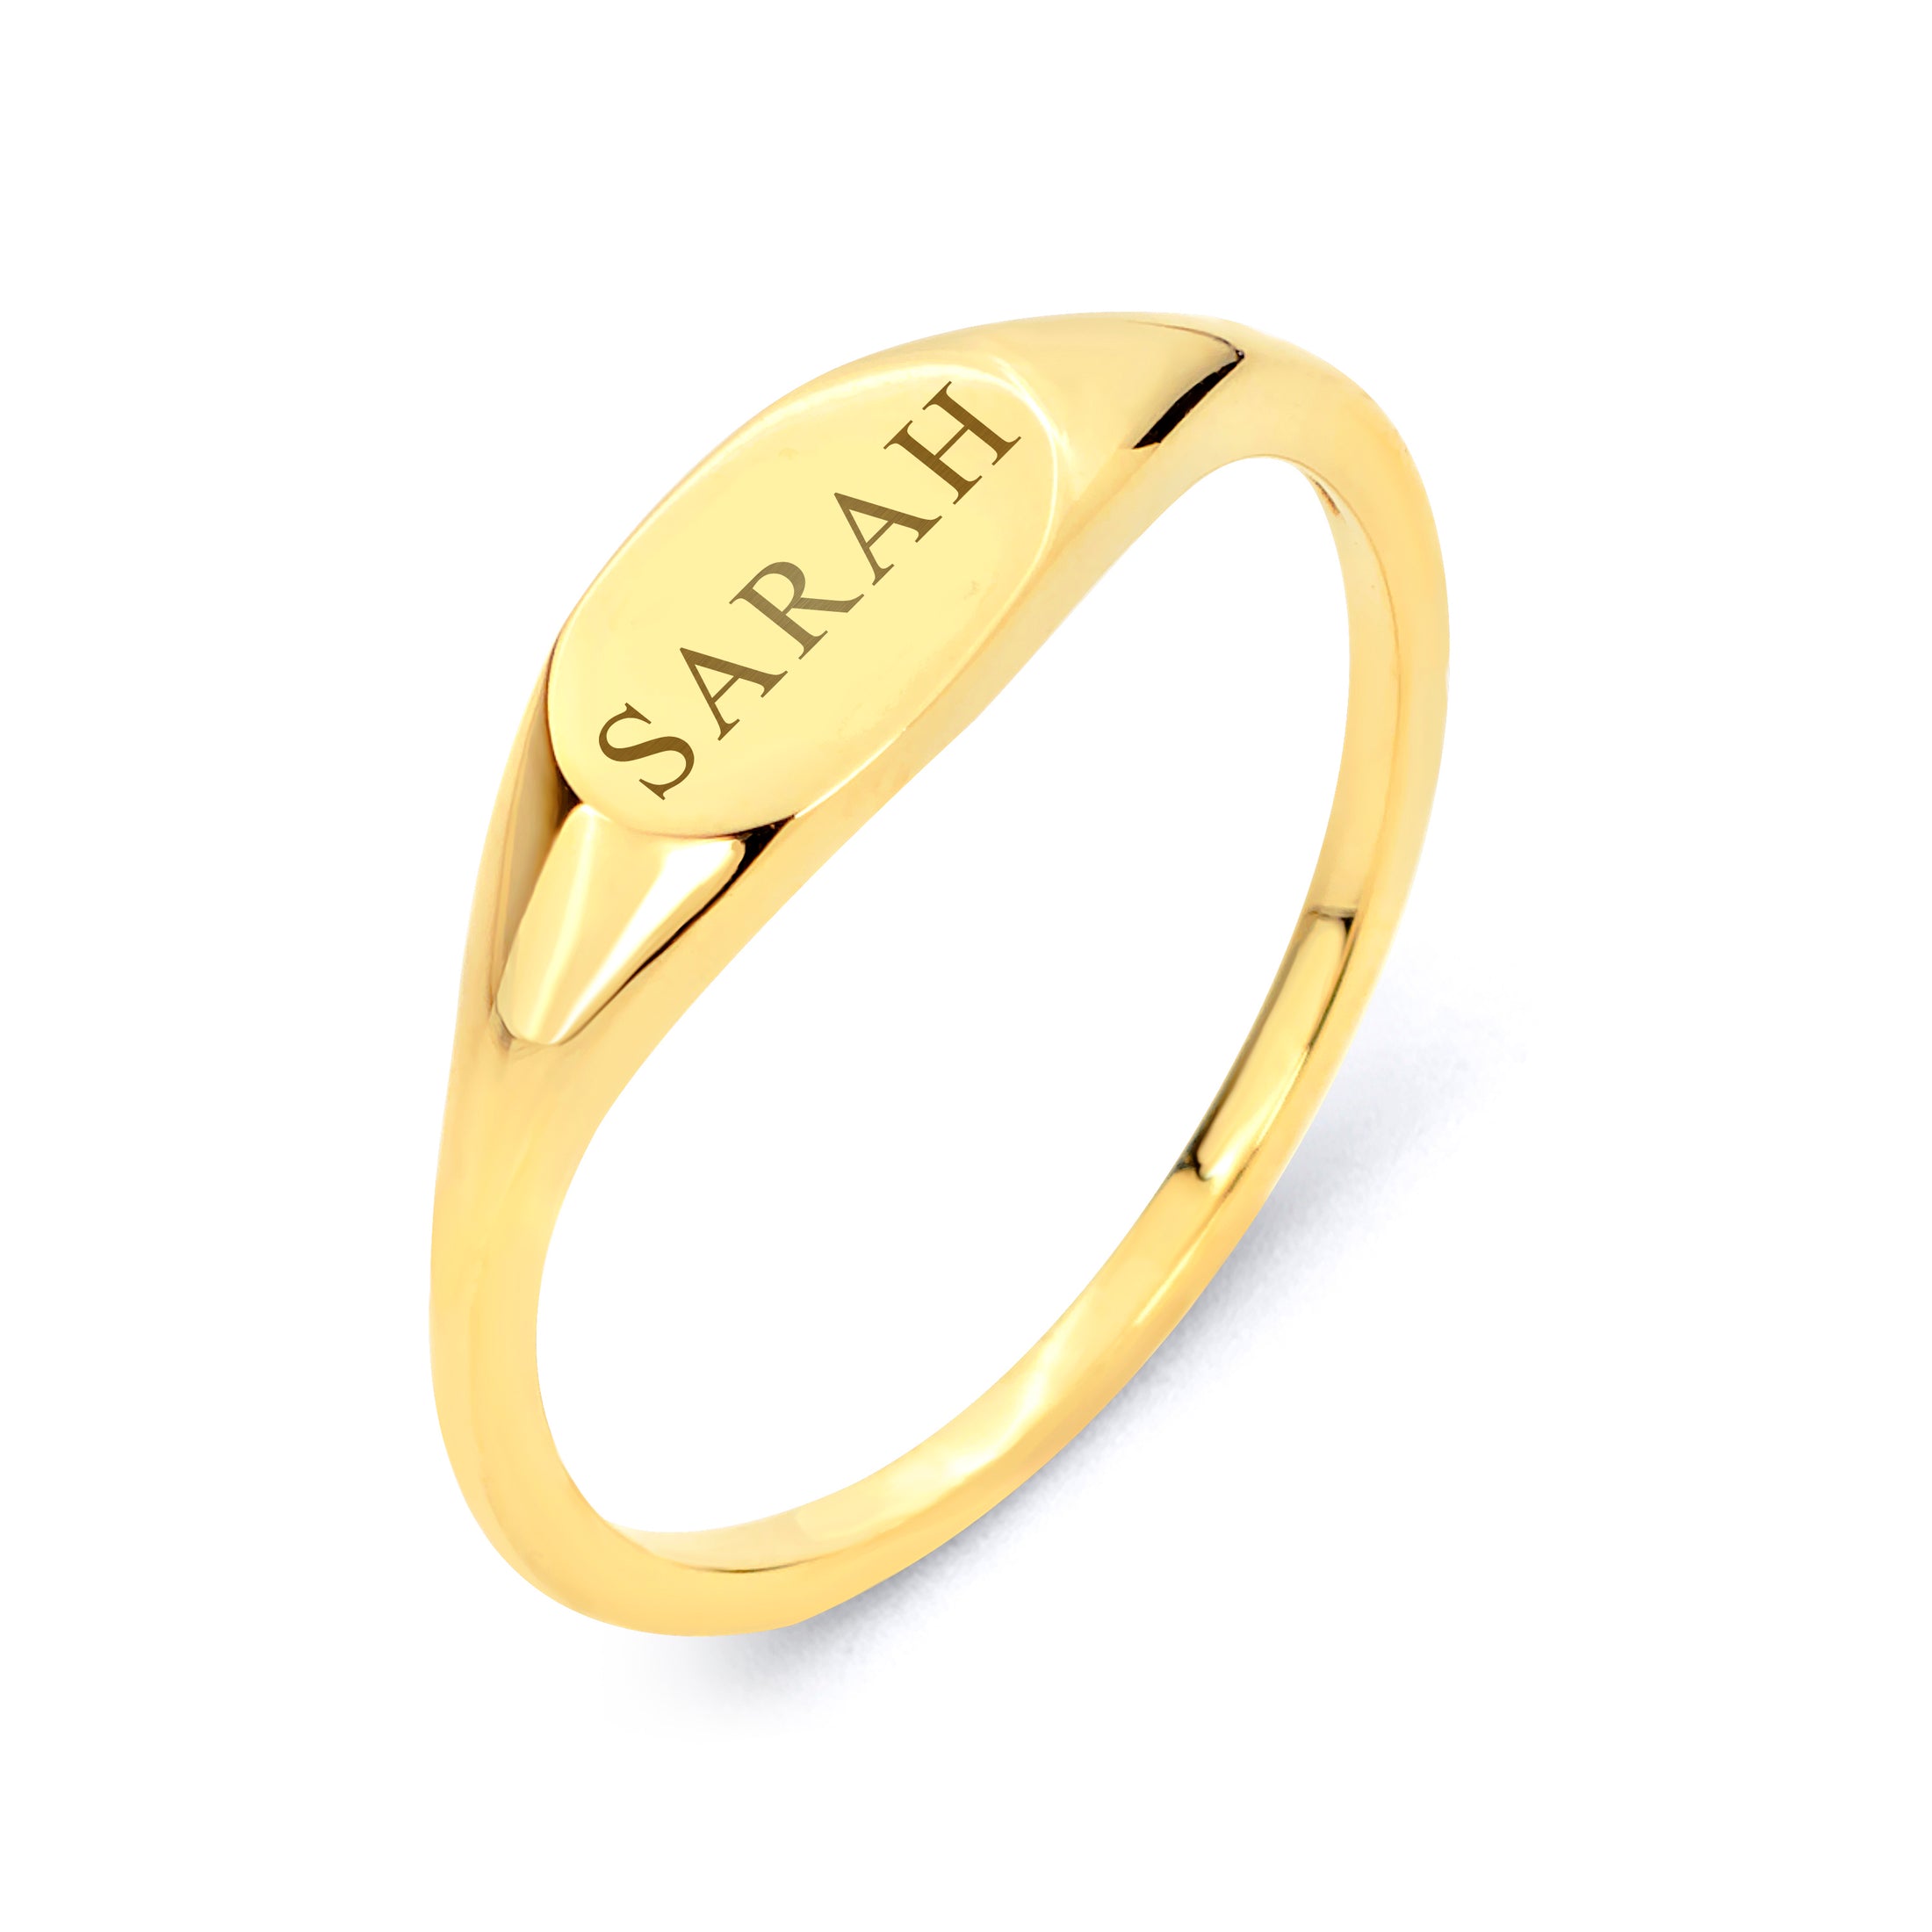 Solid Gold Personalized Name Ring - 10k or 14k